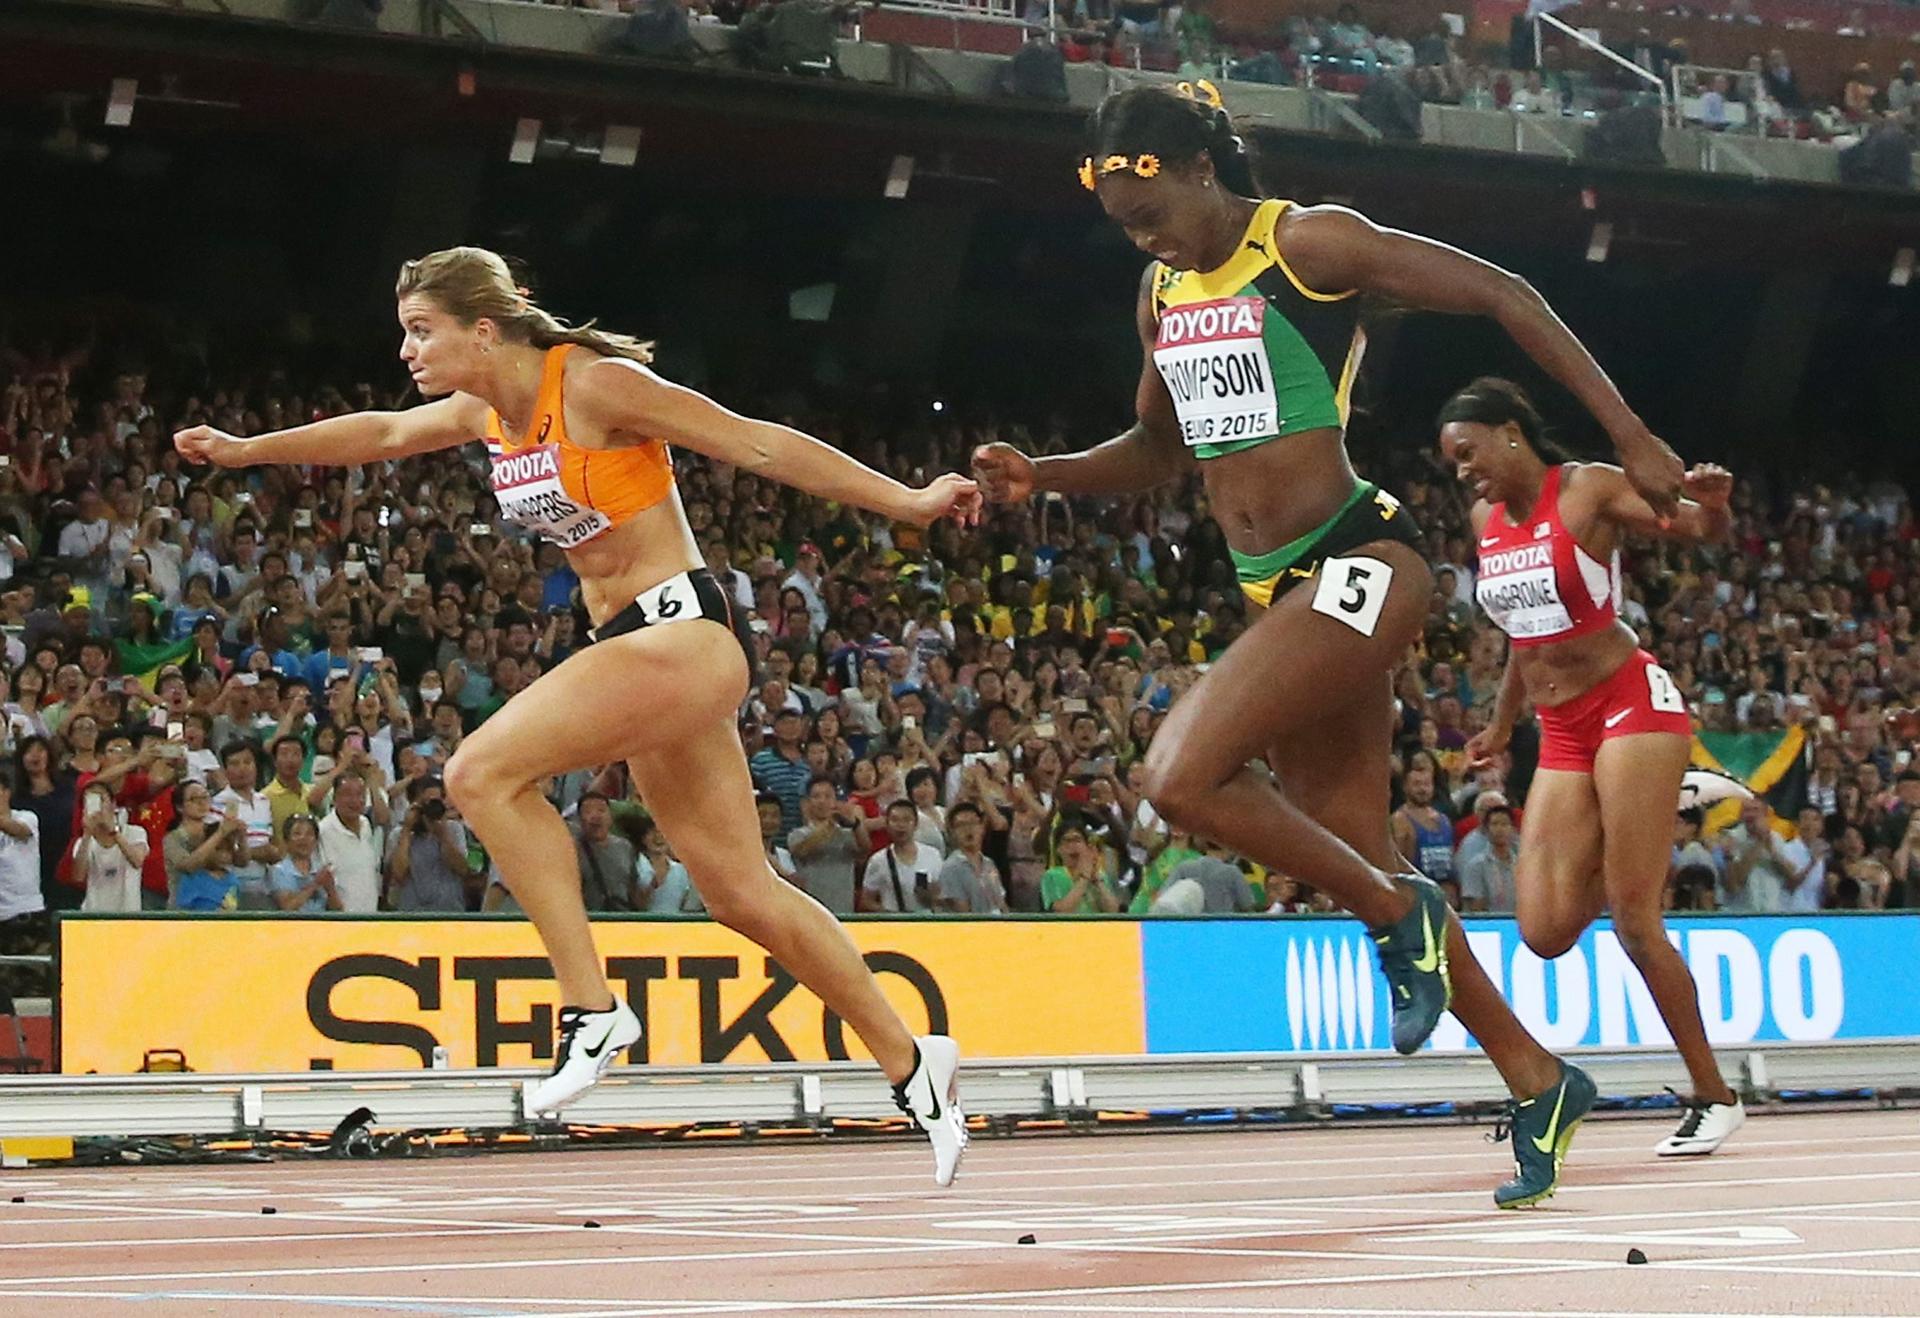 Dafne Schippers wins the 200m final to deny Jamaican Elaine Thompson gold, becoming the third fastest in history. Photo: EPA